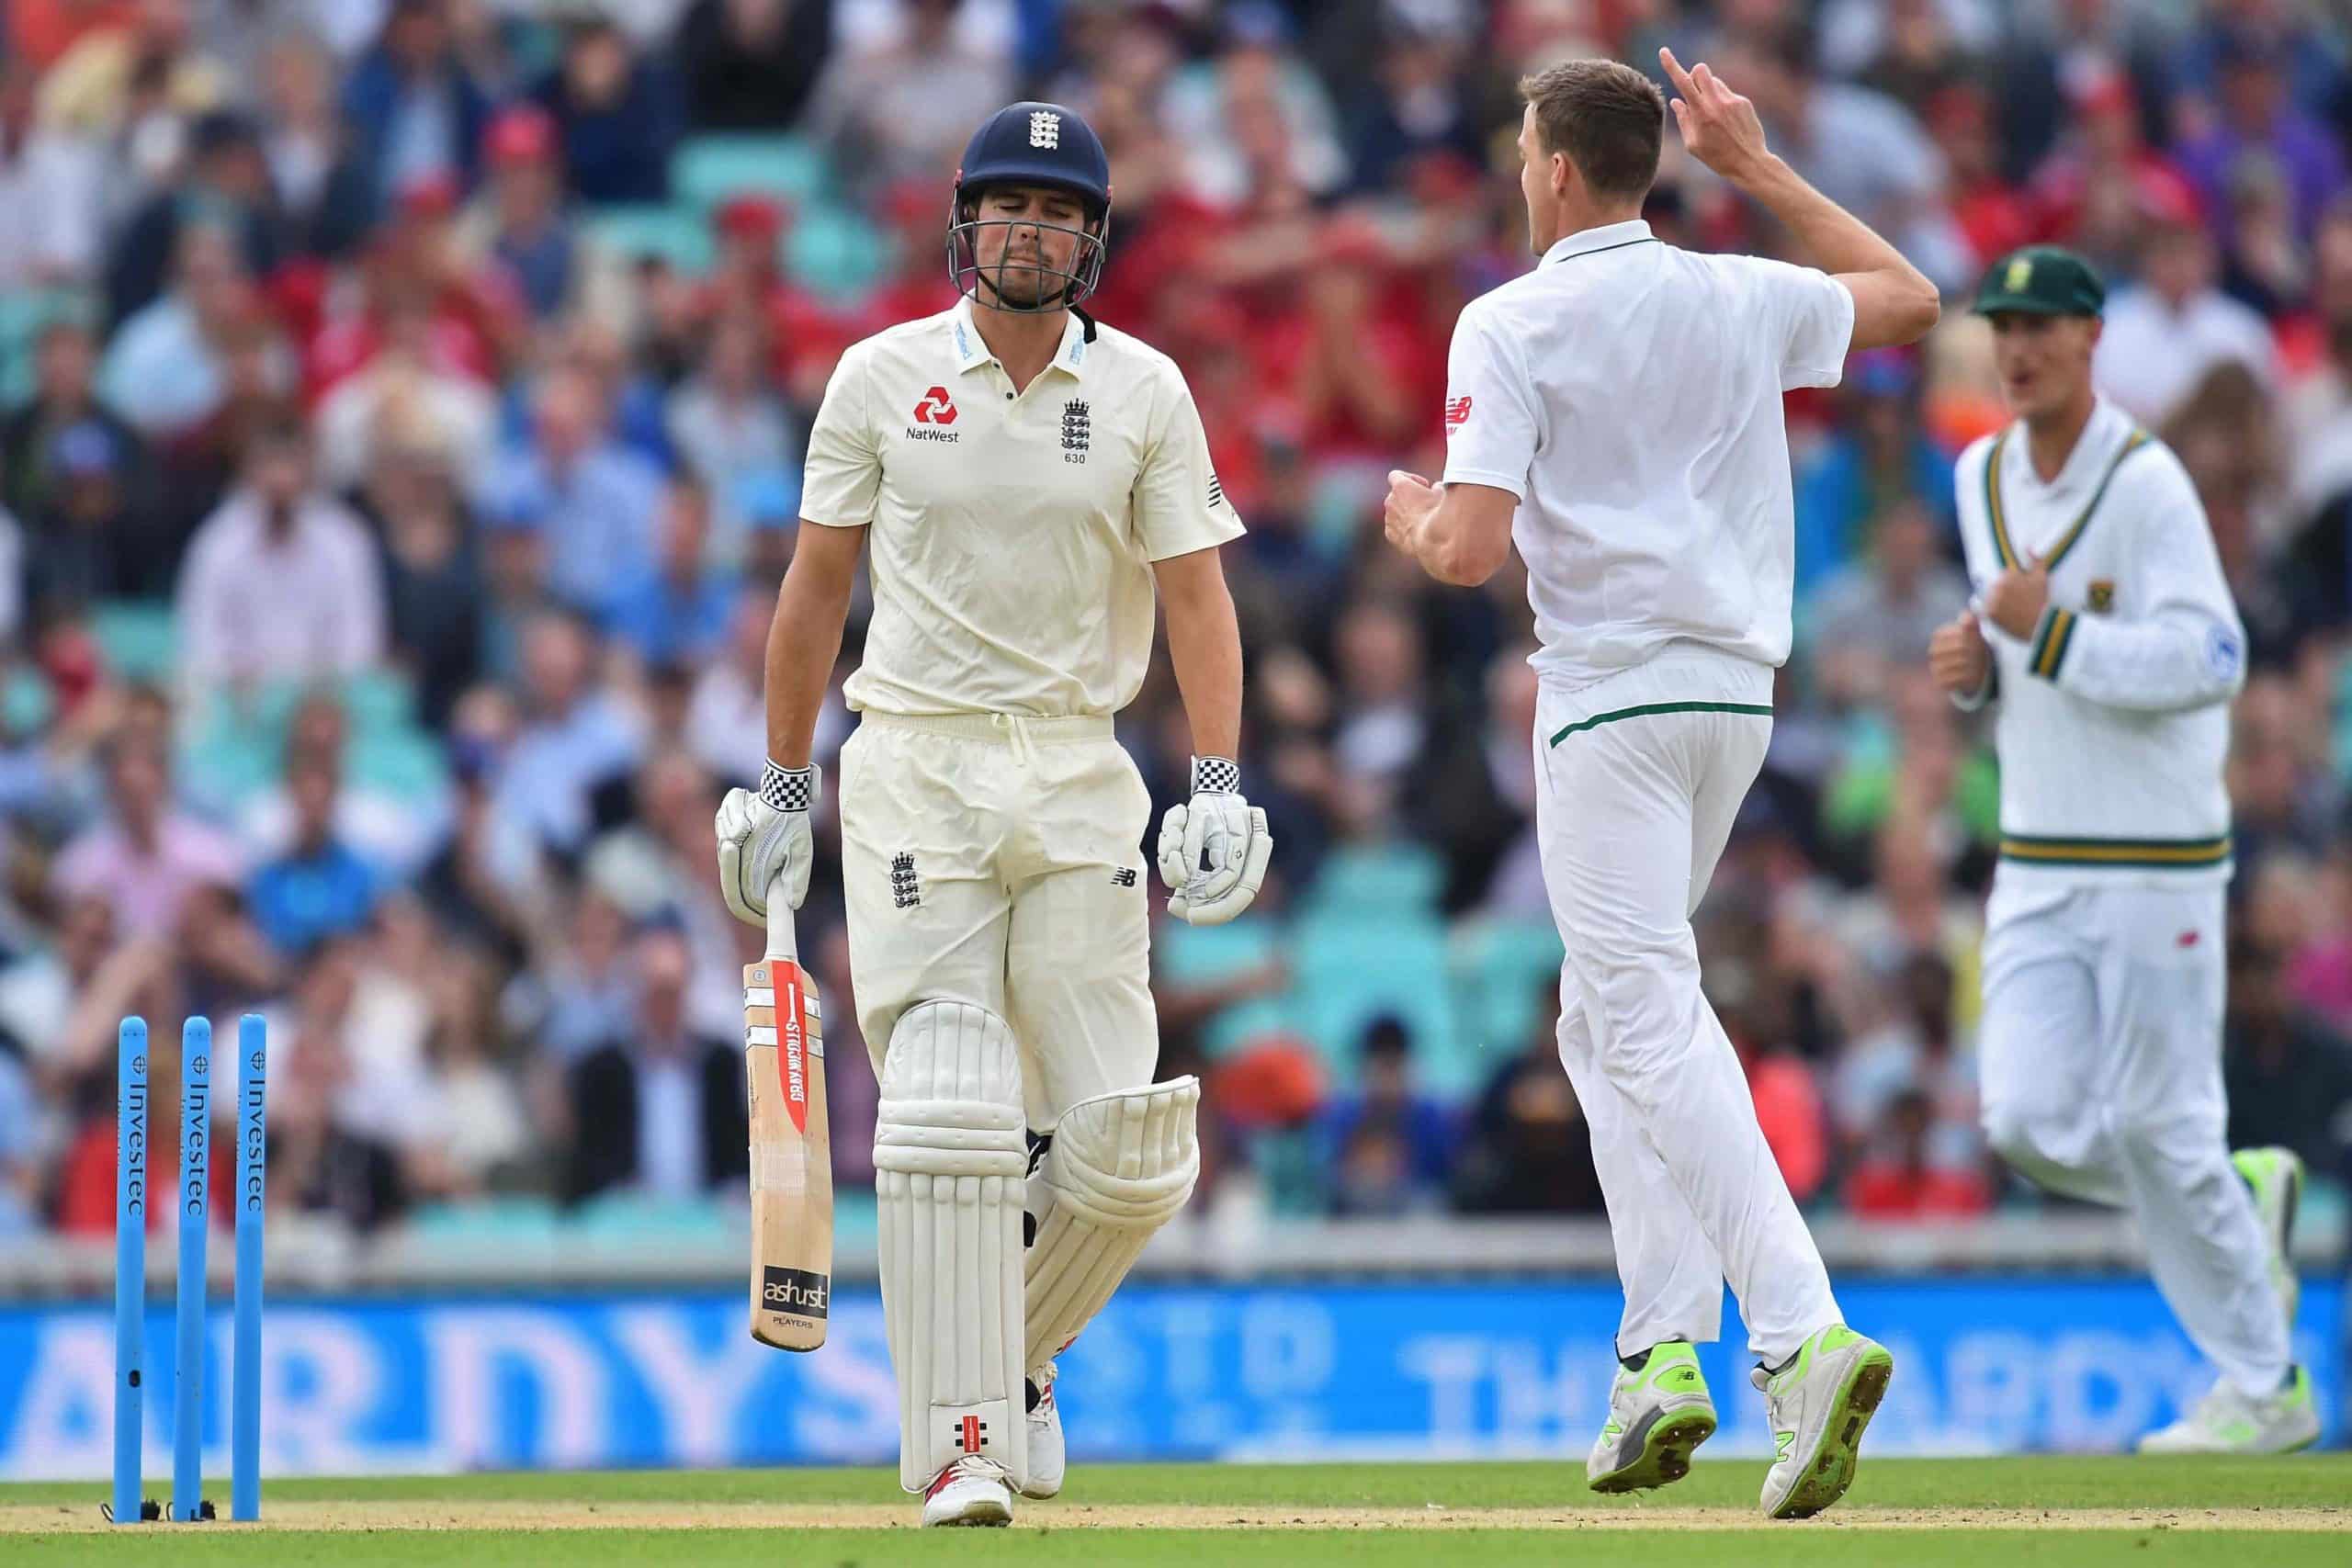 You are currently viewing Morkel dismisses Cook as England extend lead